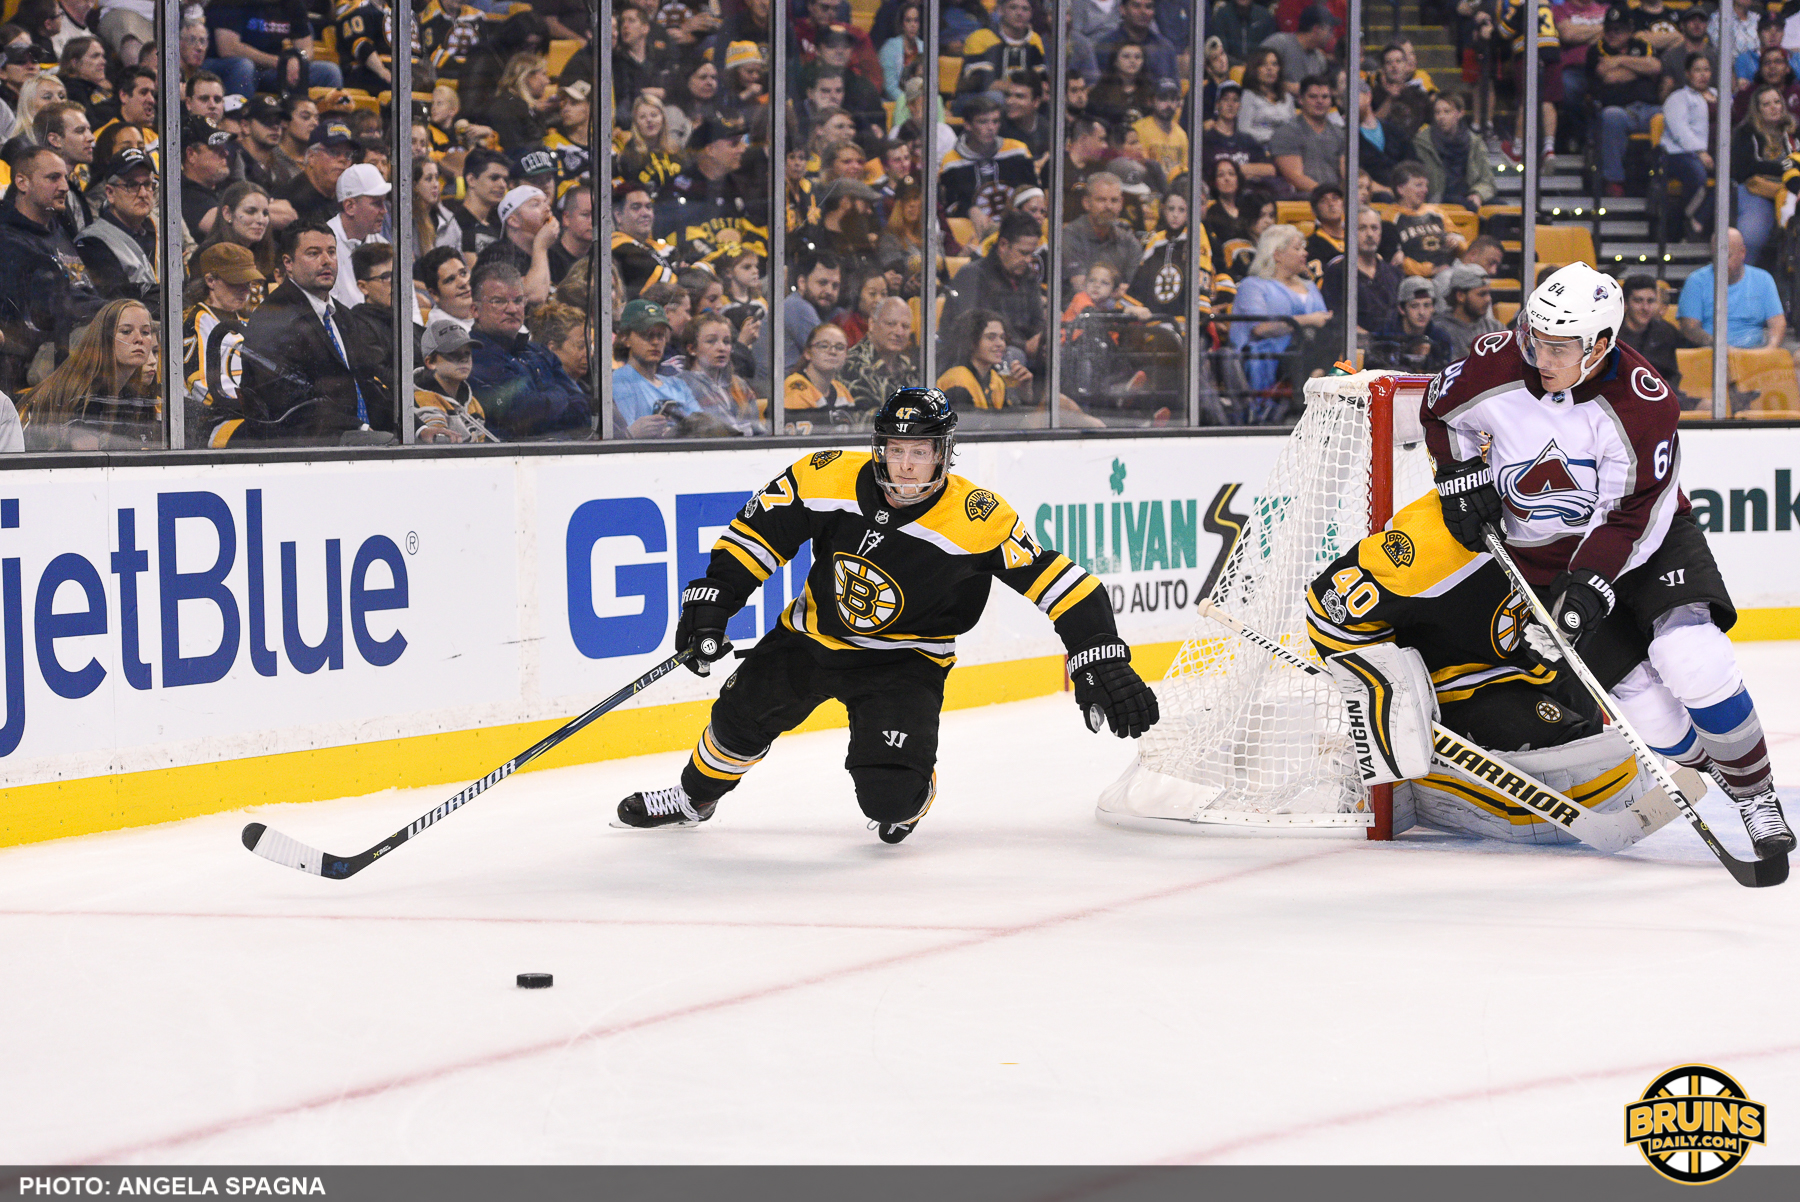 Krug, Czarnik return with mixed results - Bruins Daily